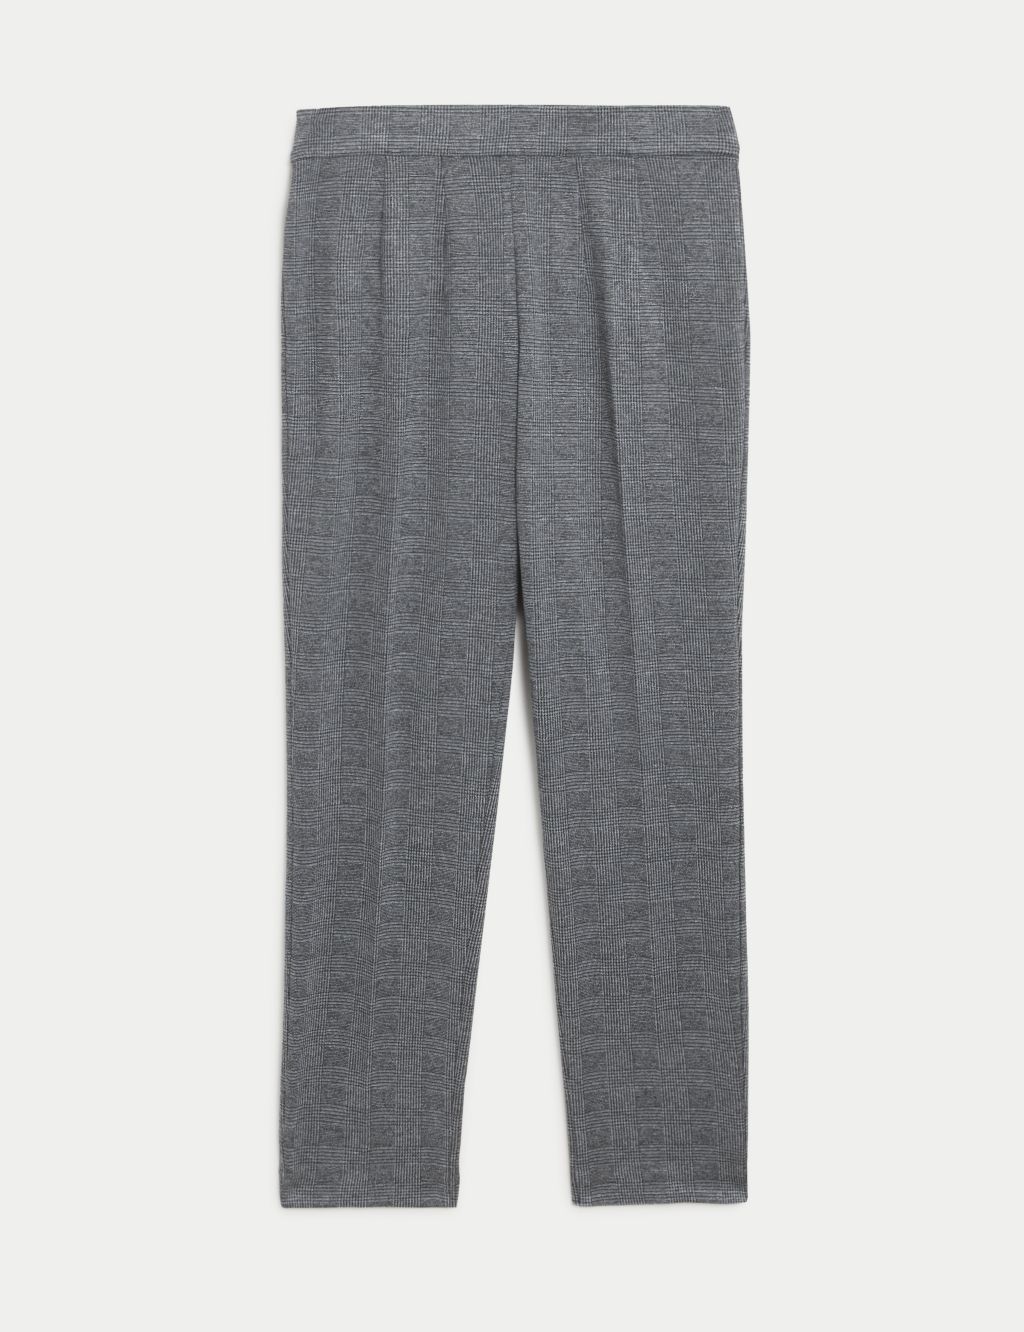 Jersey Checked Slim Fit Trousers image 2